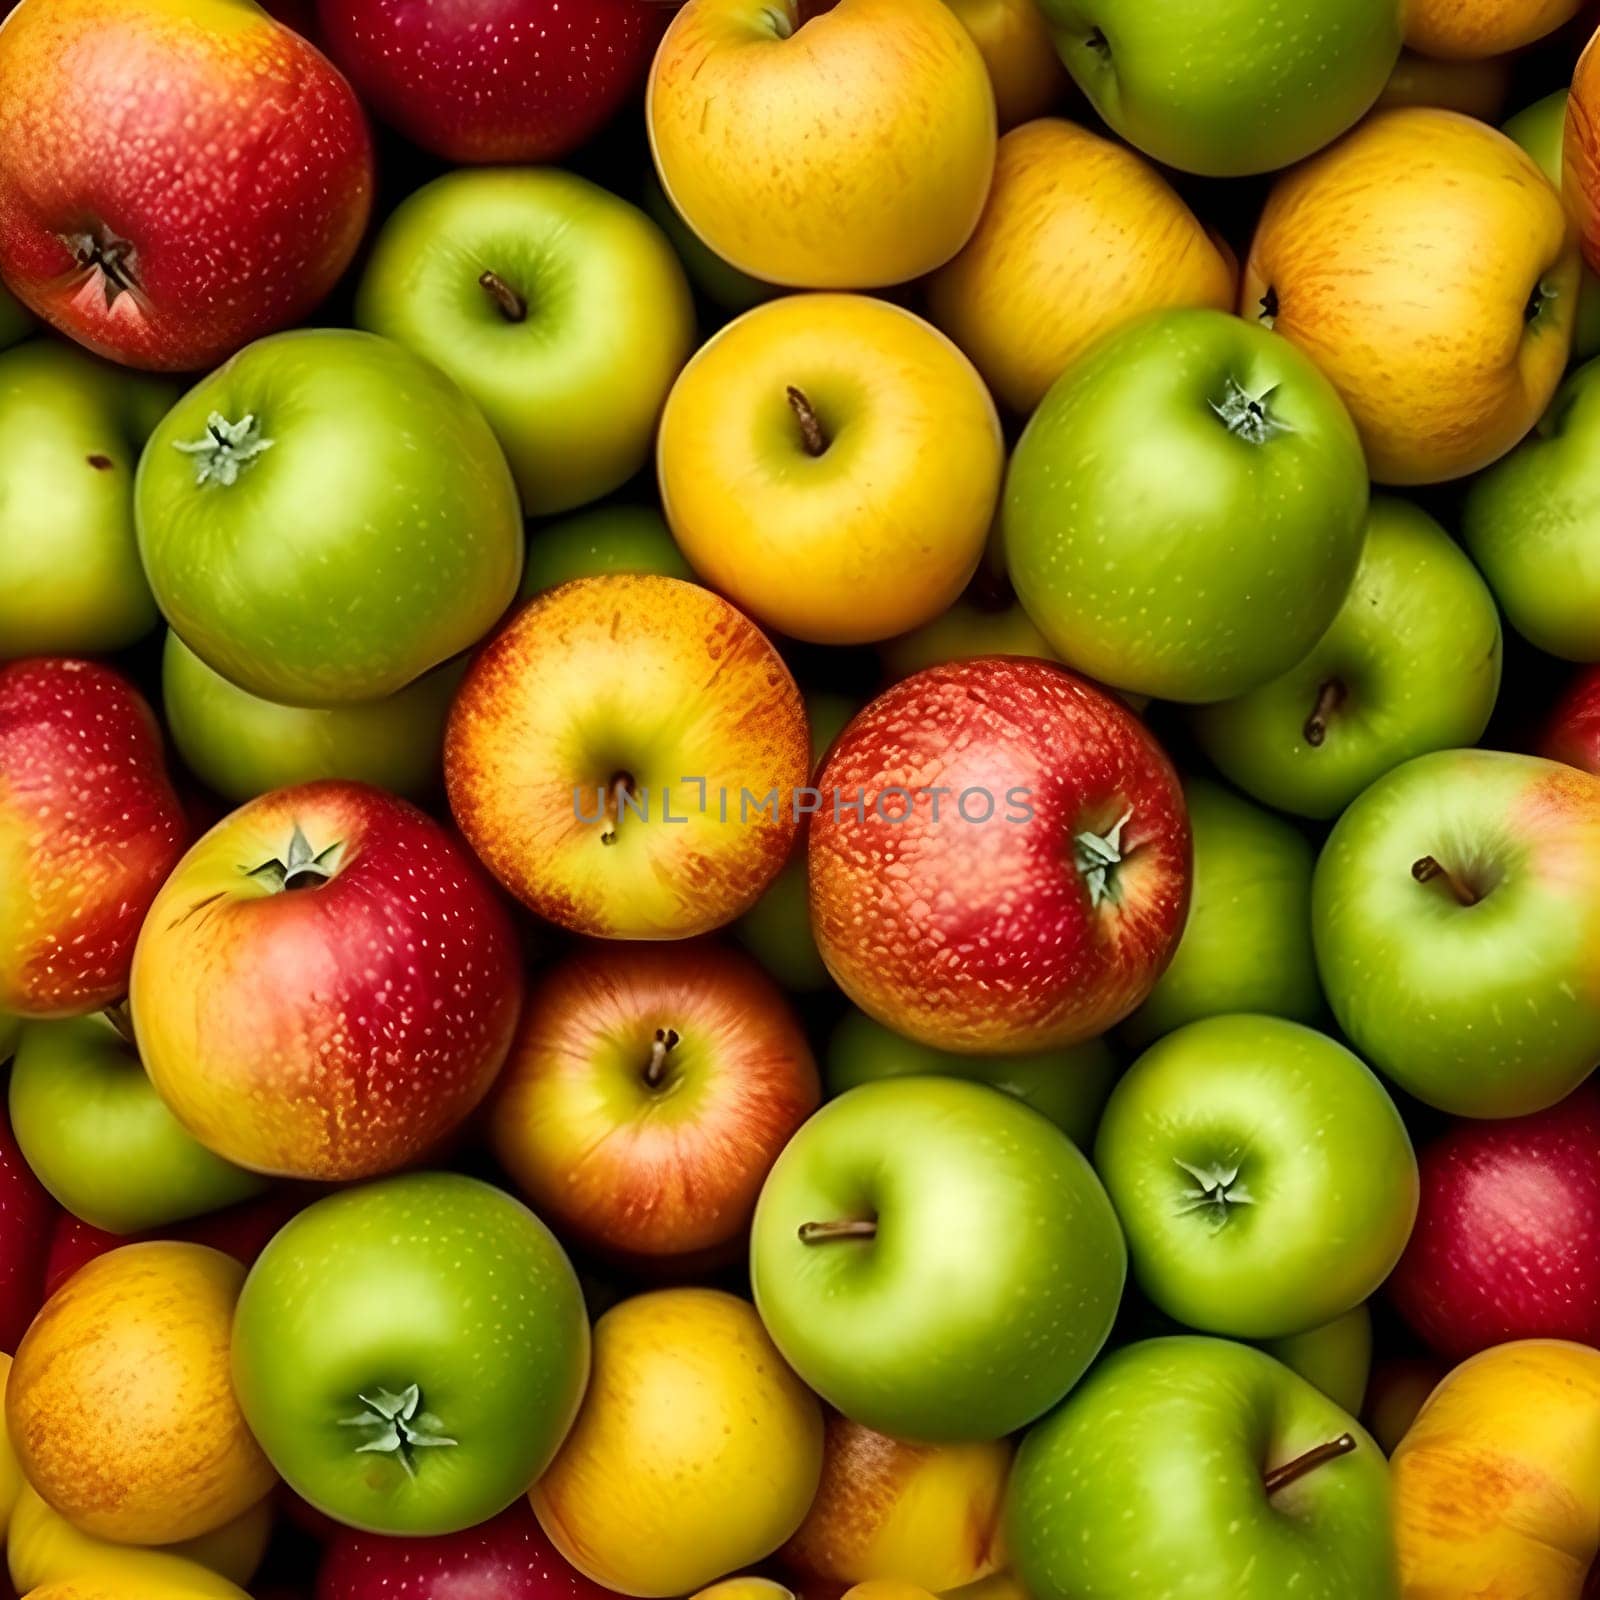 Seamless texture and background of different color apples pile with high angle view. Neural network generated image. Not based on any actual scene or pattern.